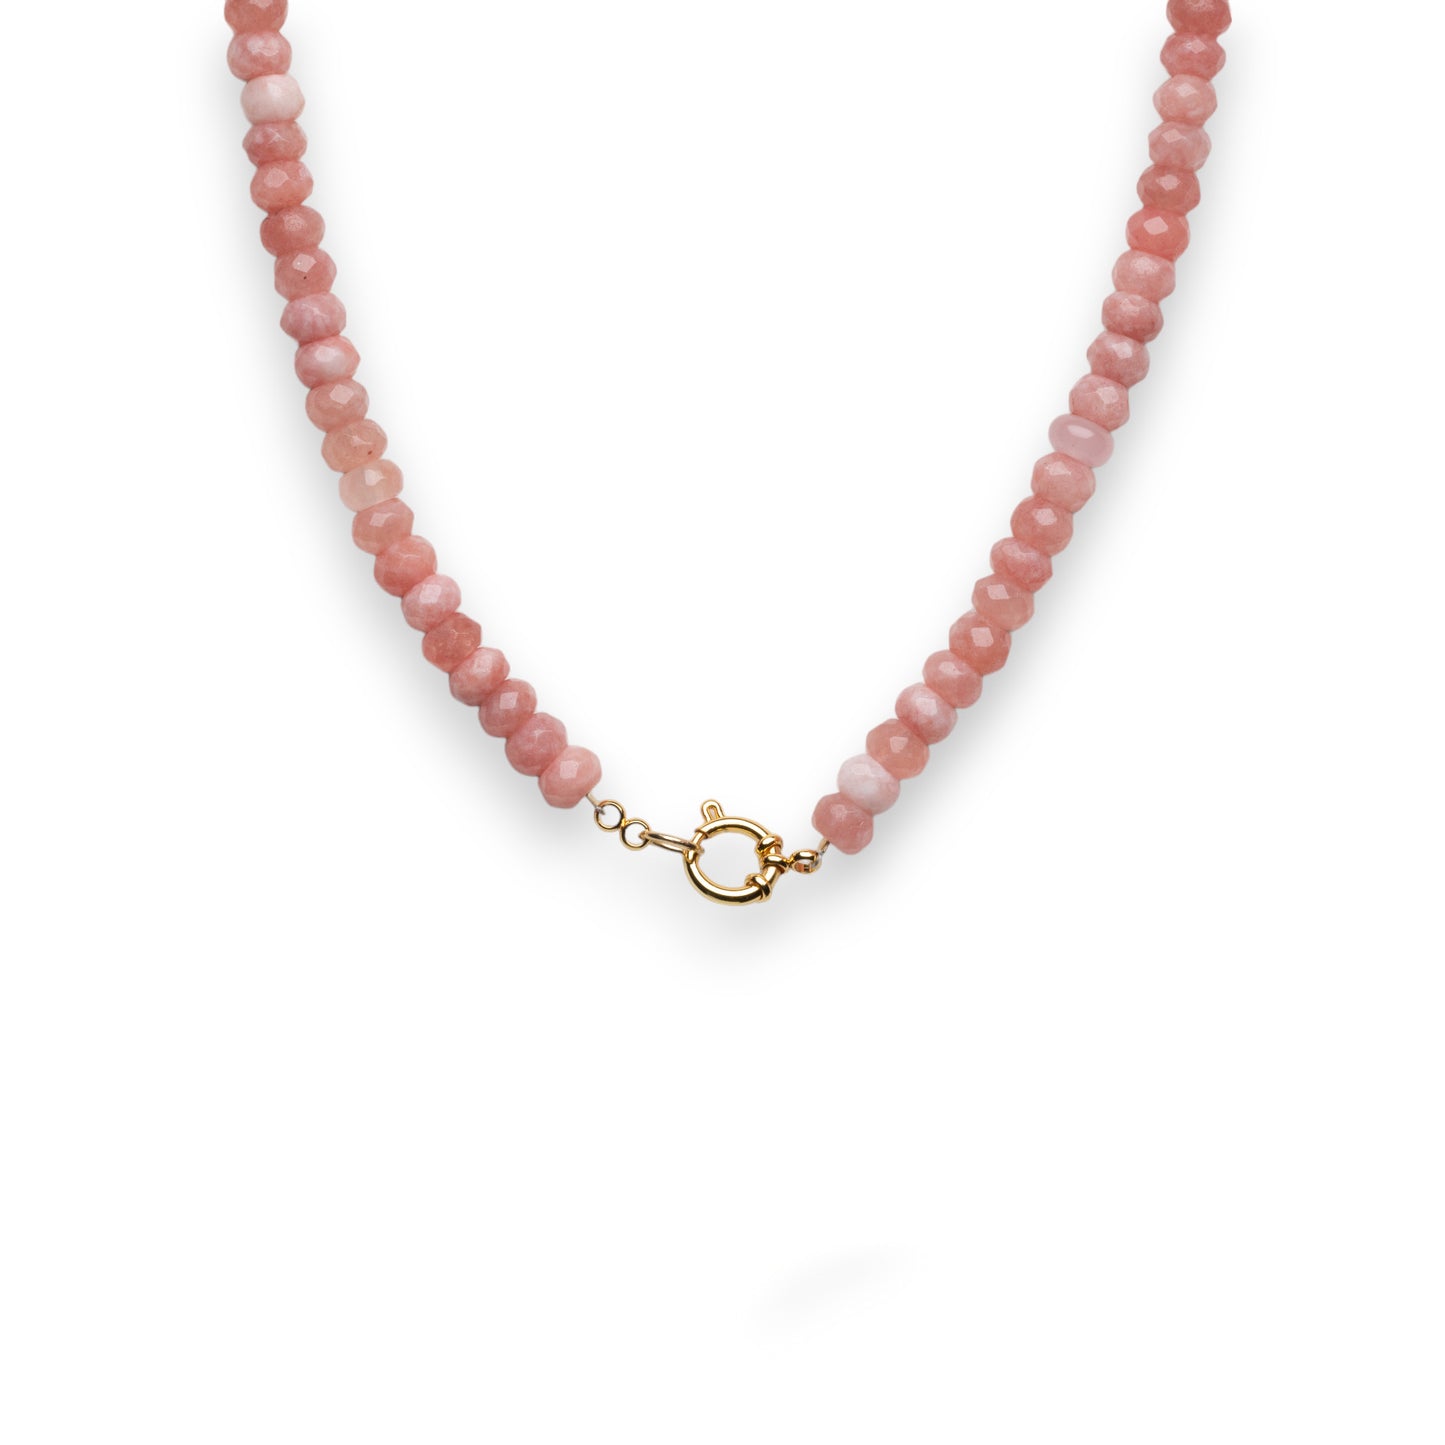 Blush Mauve Faceted Crystal Bead Necklace with Round Clasp